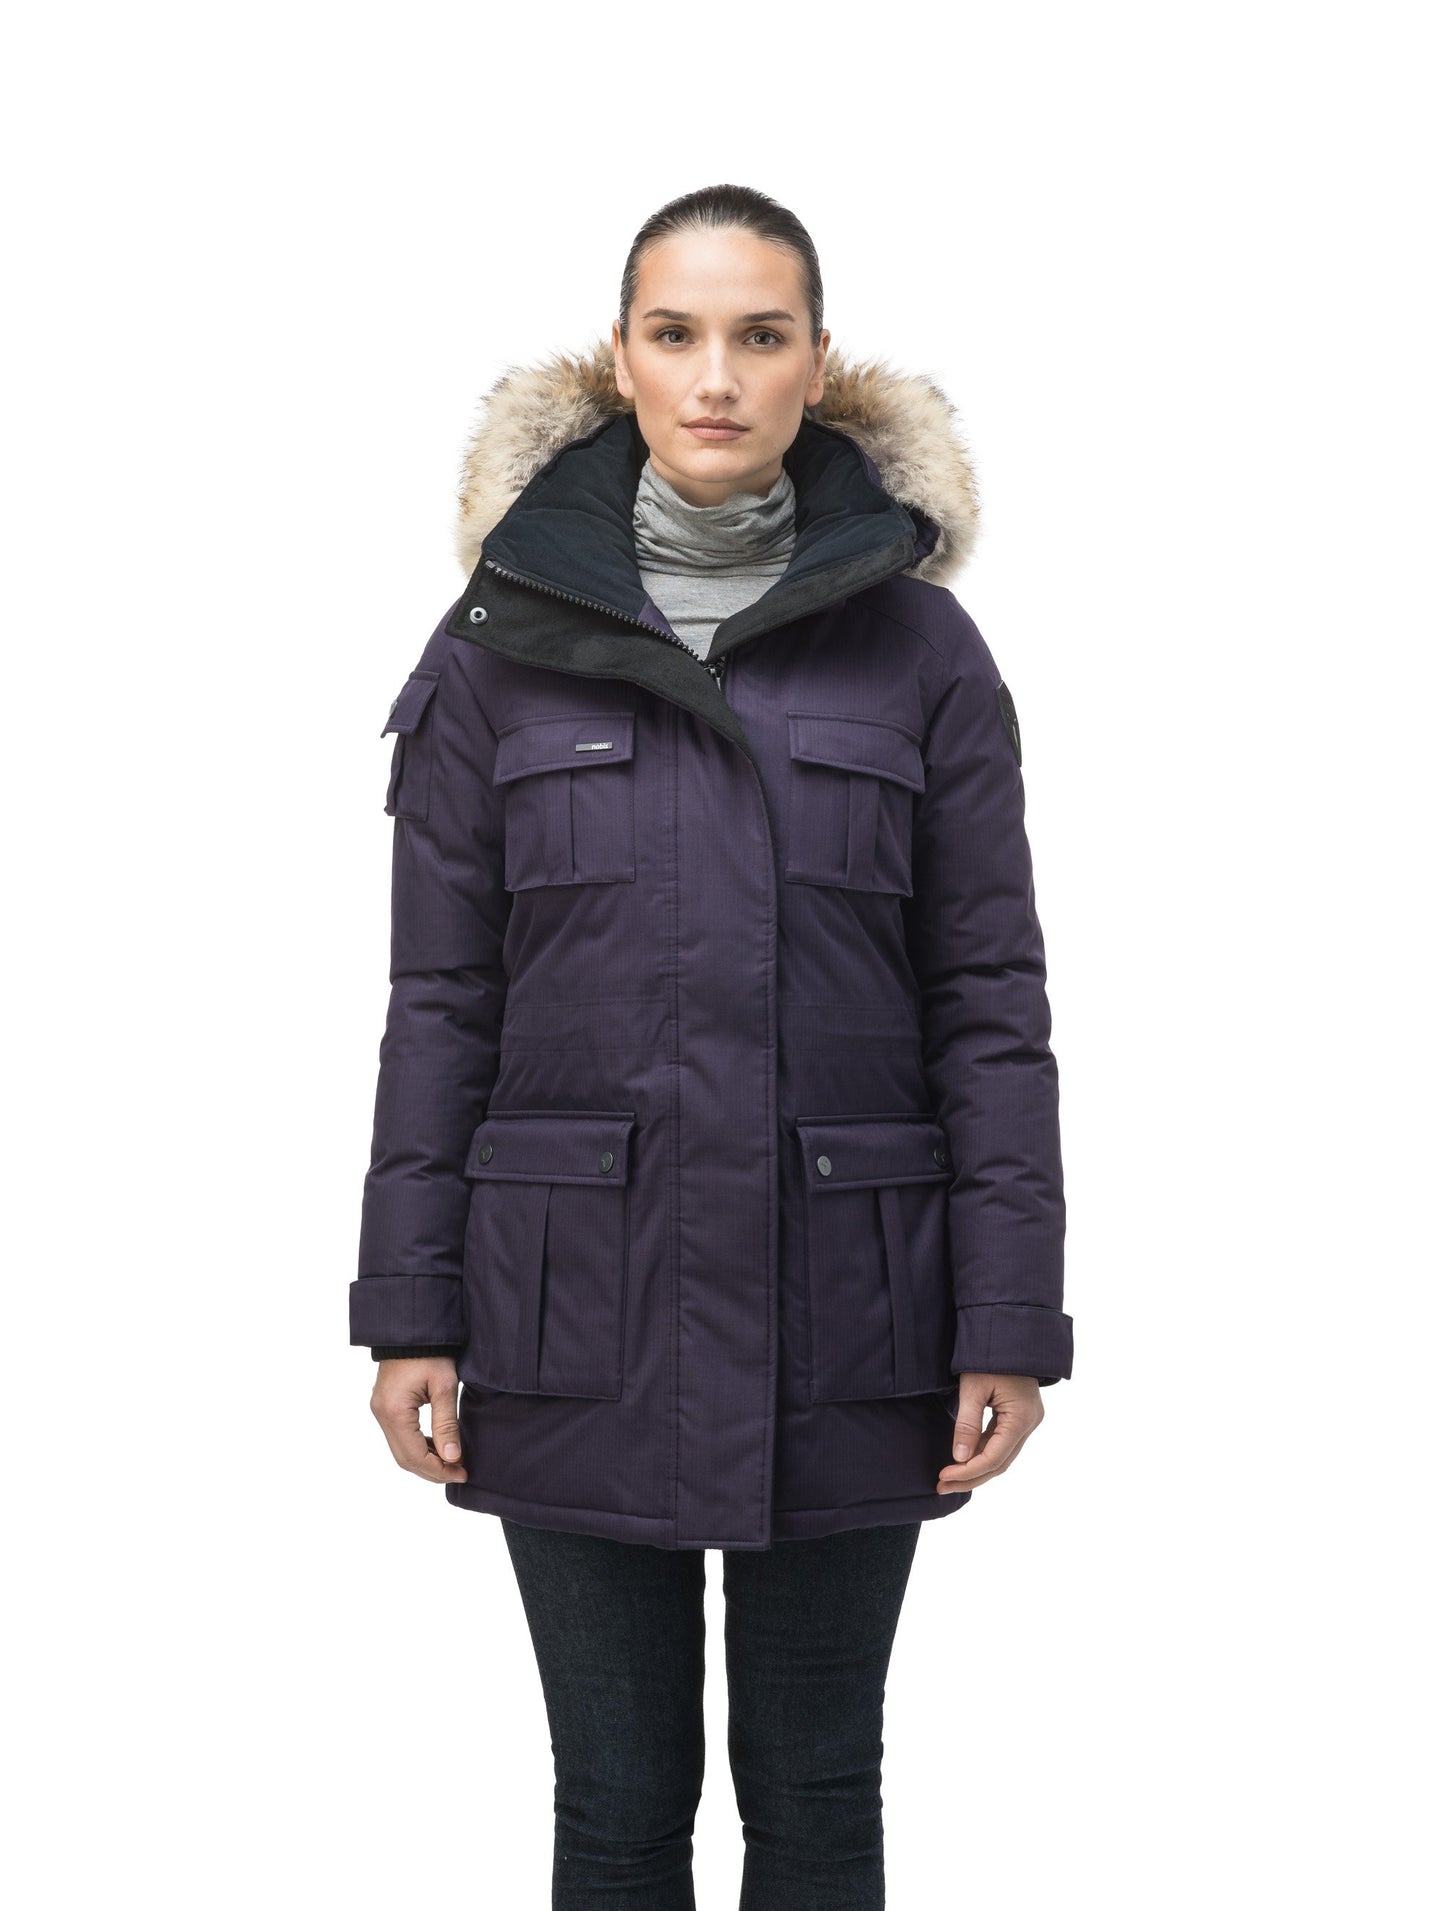 Women's down filled thigh length parka with four pleated patch pockets and an adjustable waist in CH Purple